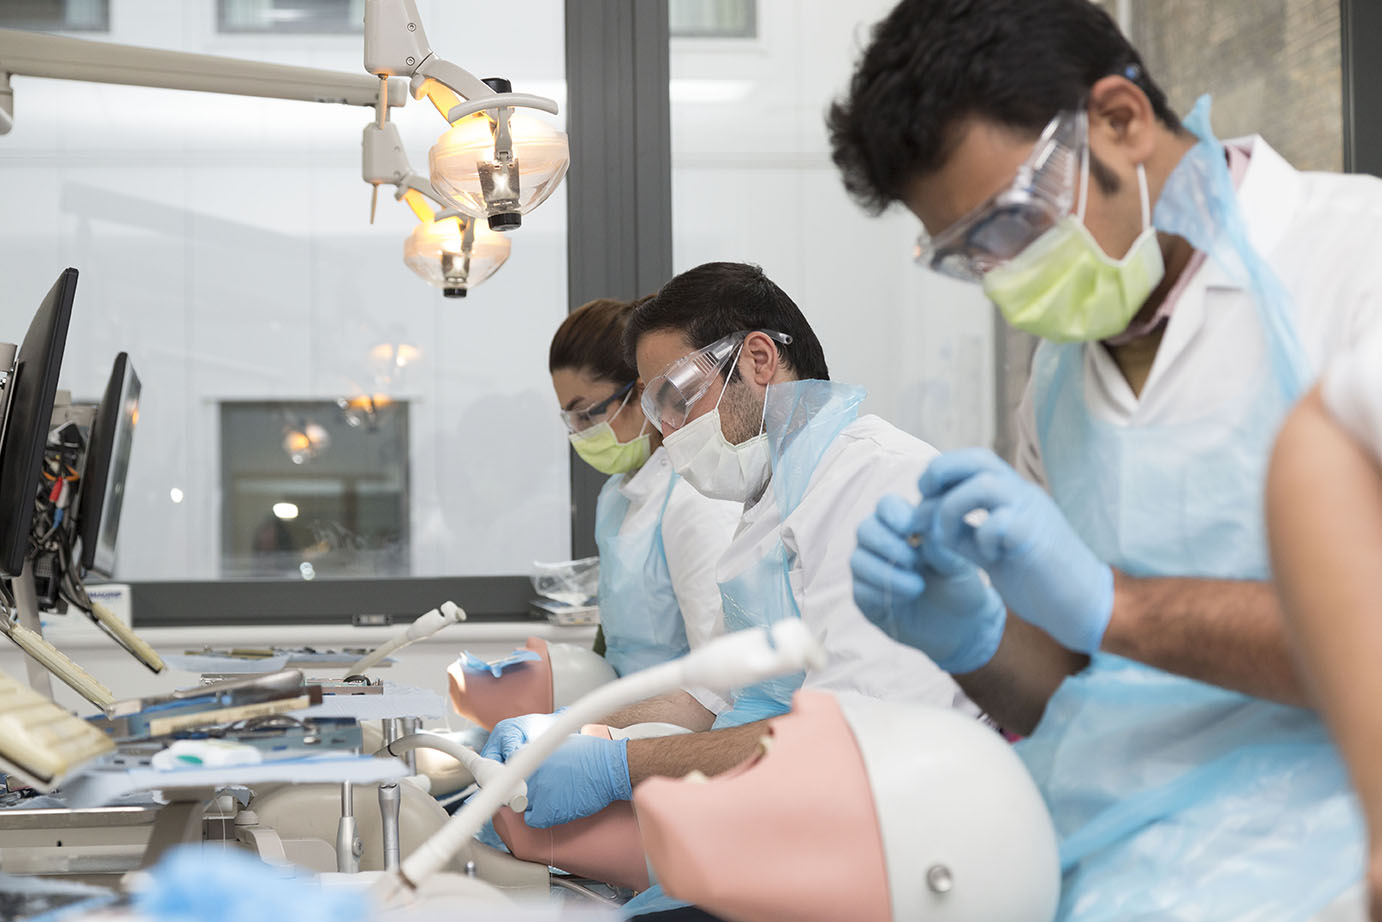 Dentistry students training using a simulation dummy